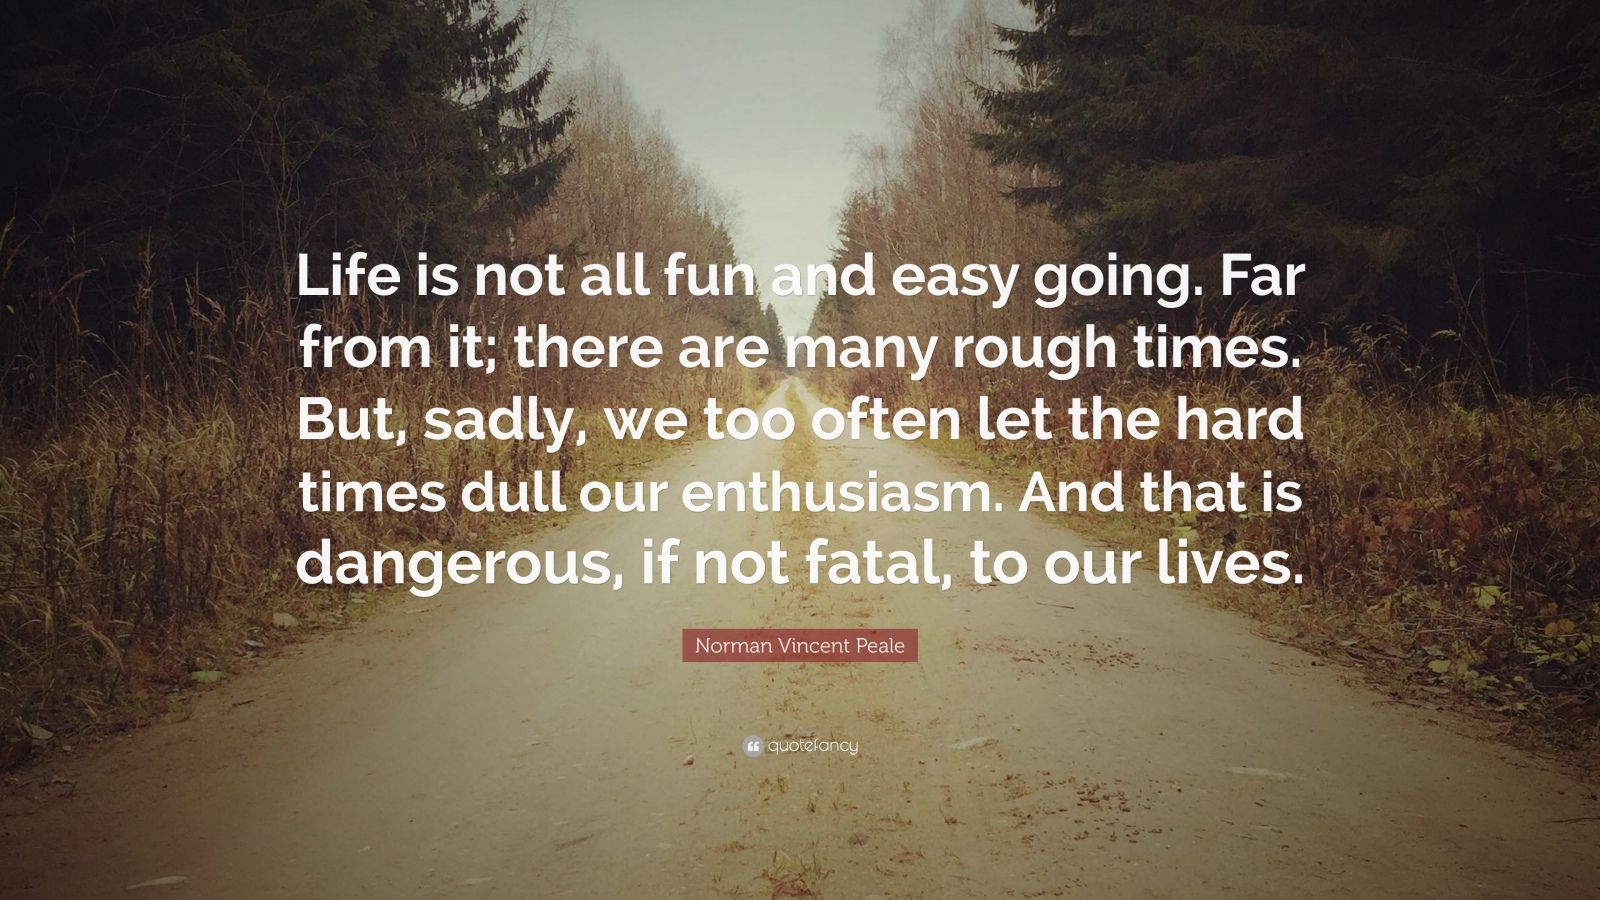 Norman Vincent Peale Quote: “Life is not all fun and easy going. Far